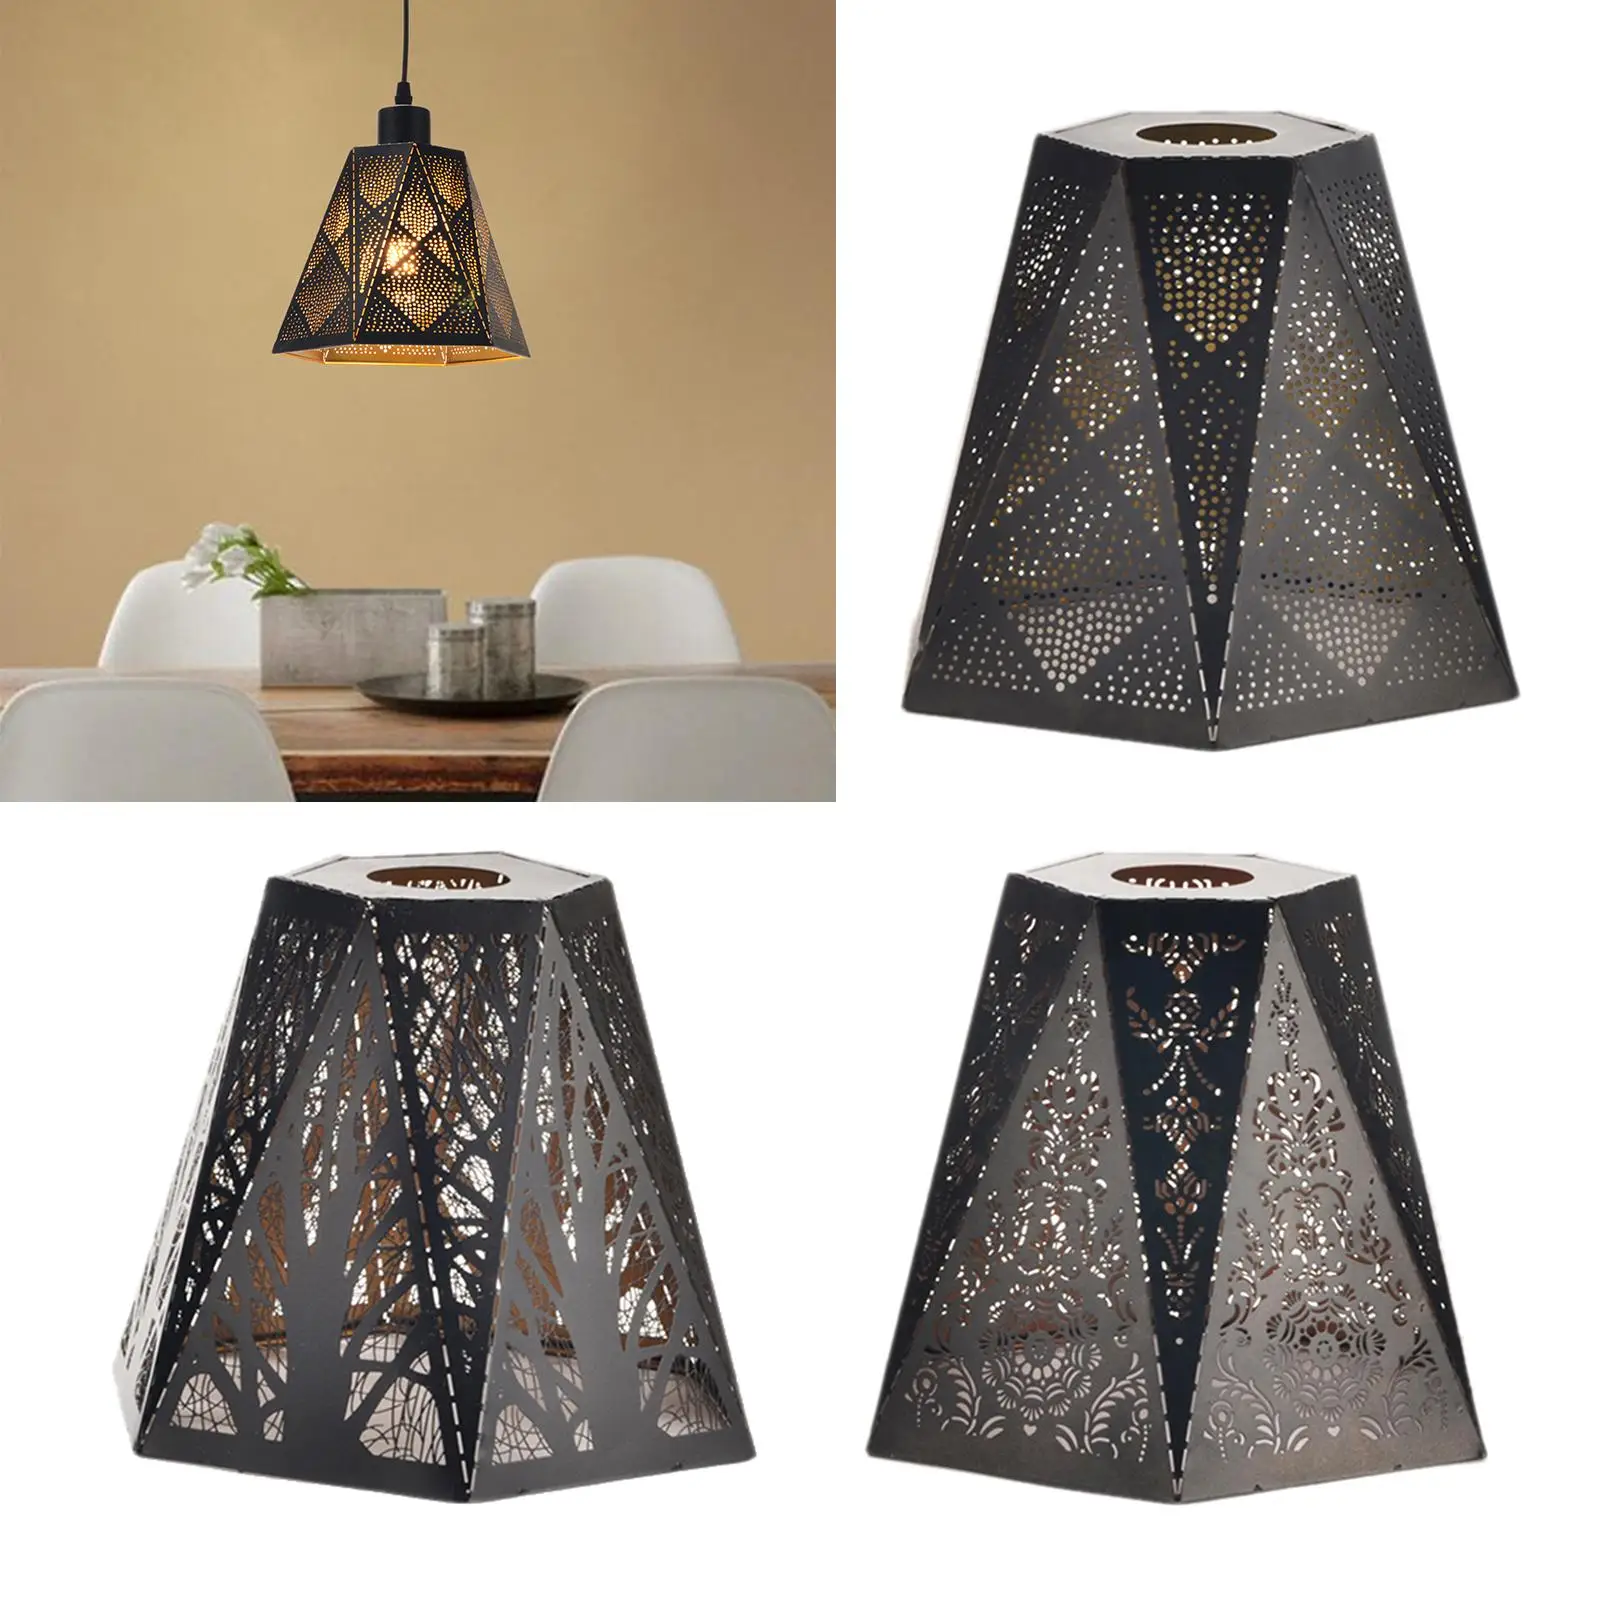 Rustic Style Pendant Lamp Shade Wrought Iron Lampshade for Teahouse Hotel